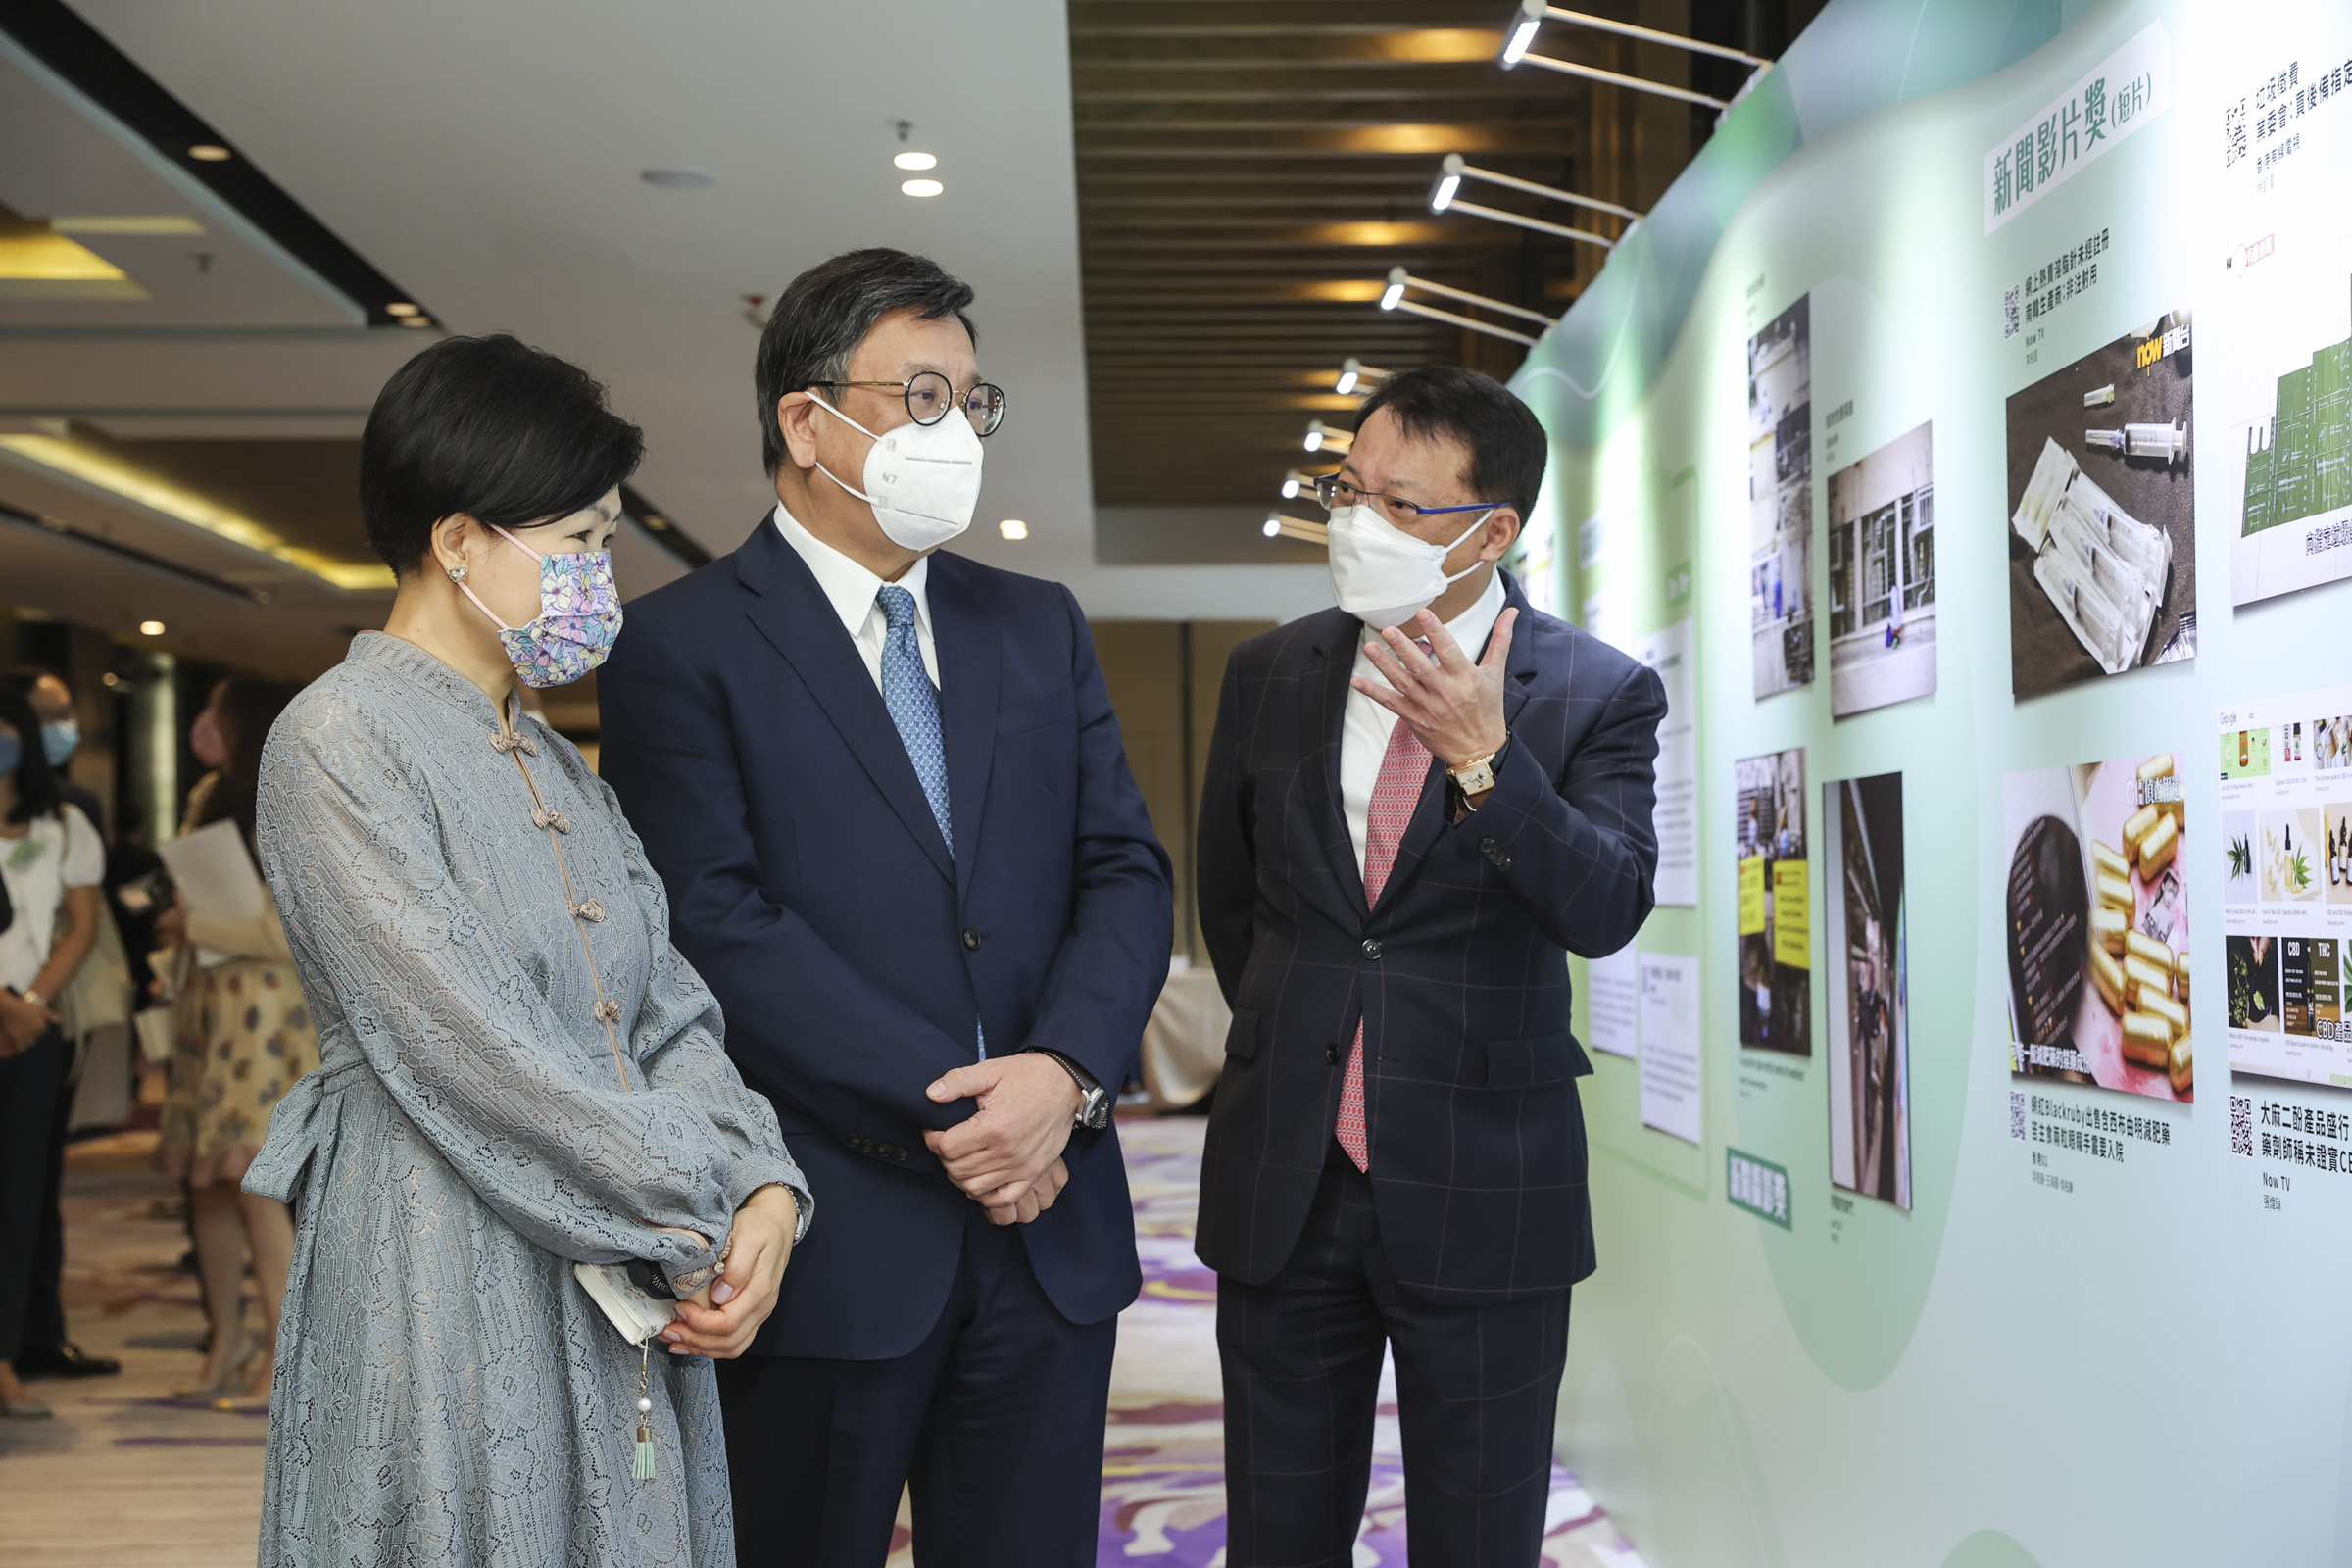 The Honourable Algernon Yau Ying-wah, Secretary for Commerce and Economic Development views the exhibit of winning entries, accompanied by Mr Clement Chan Kam-wing, Chairman of the Consumer Council, and Ms Gilly Wong Fung-han, Chief Executive of the Consumer Council.